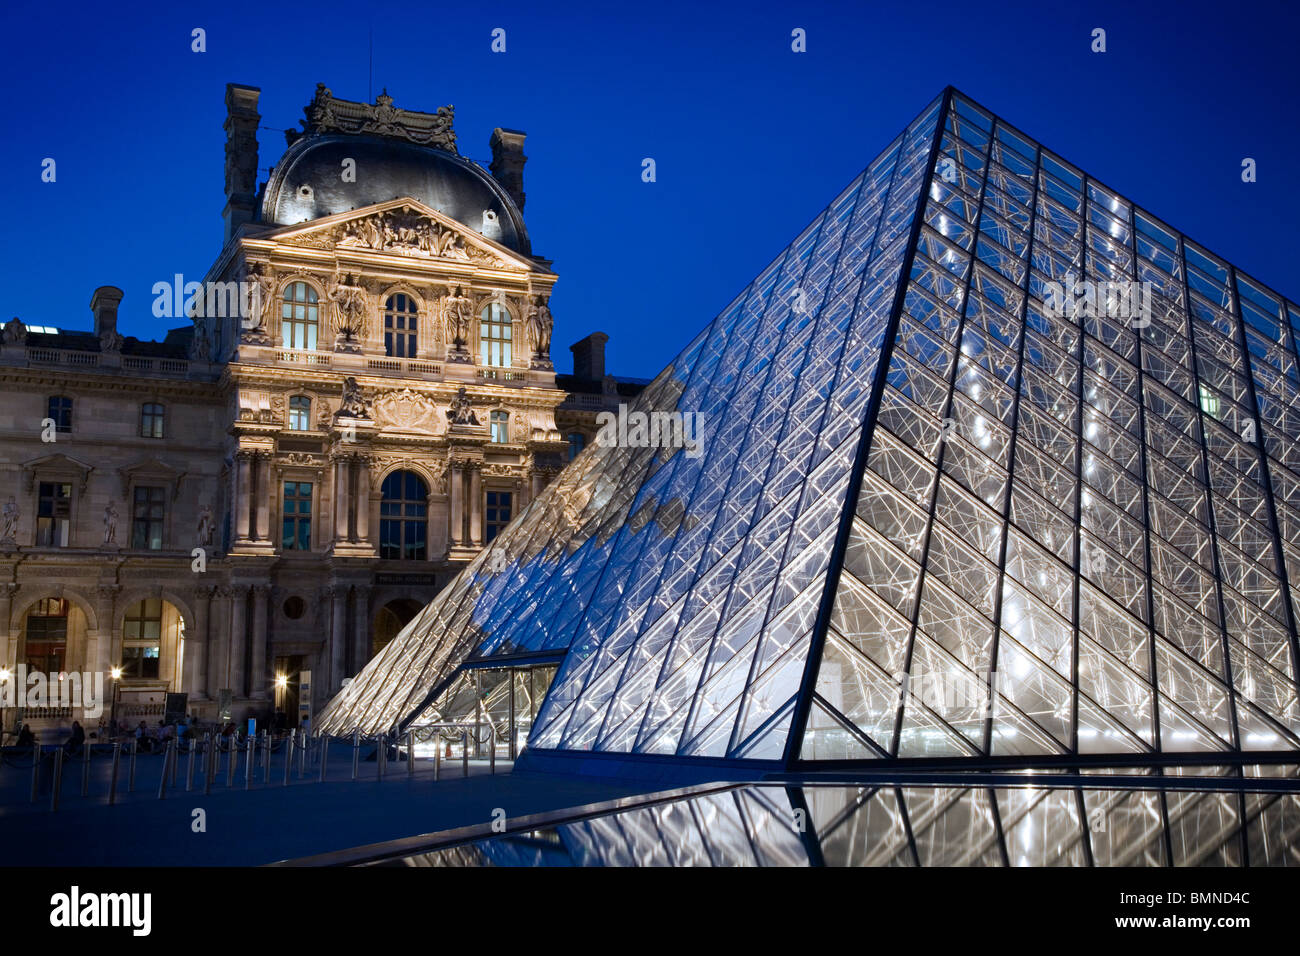 The Musee Du Louvre Pyramid with the Louvre Palais, Paris Stock Photo